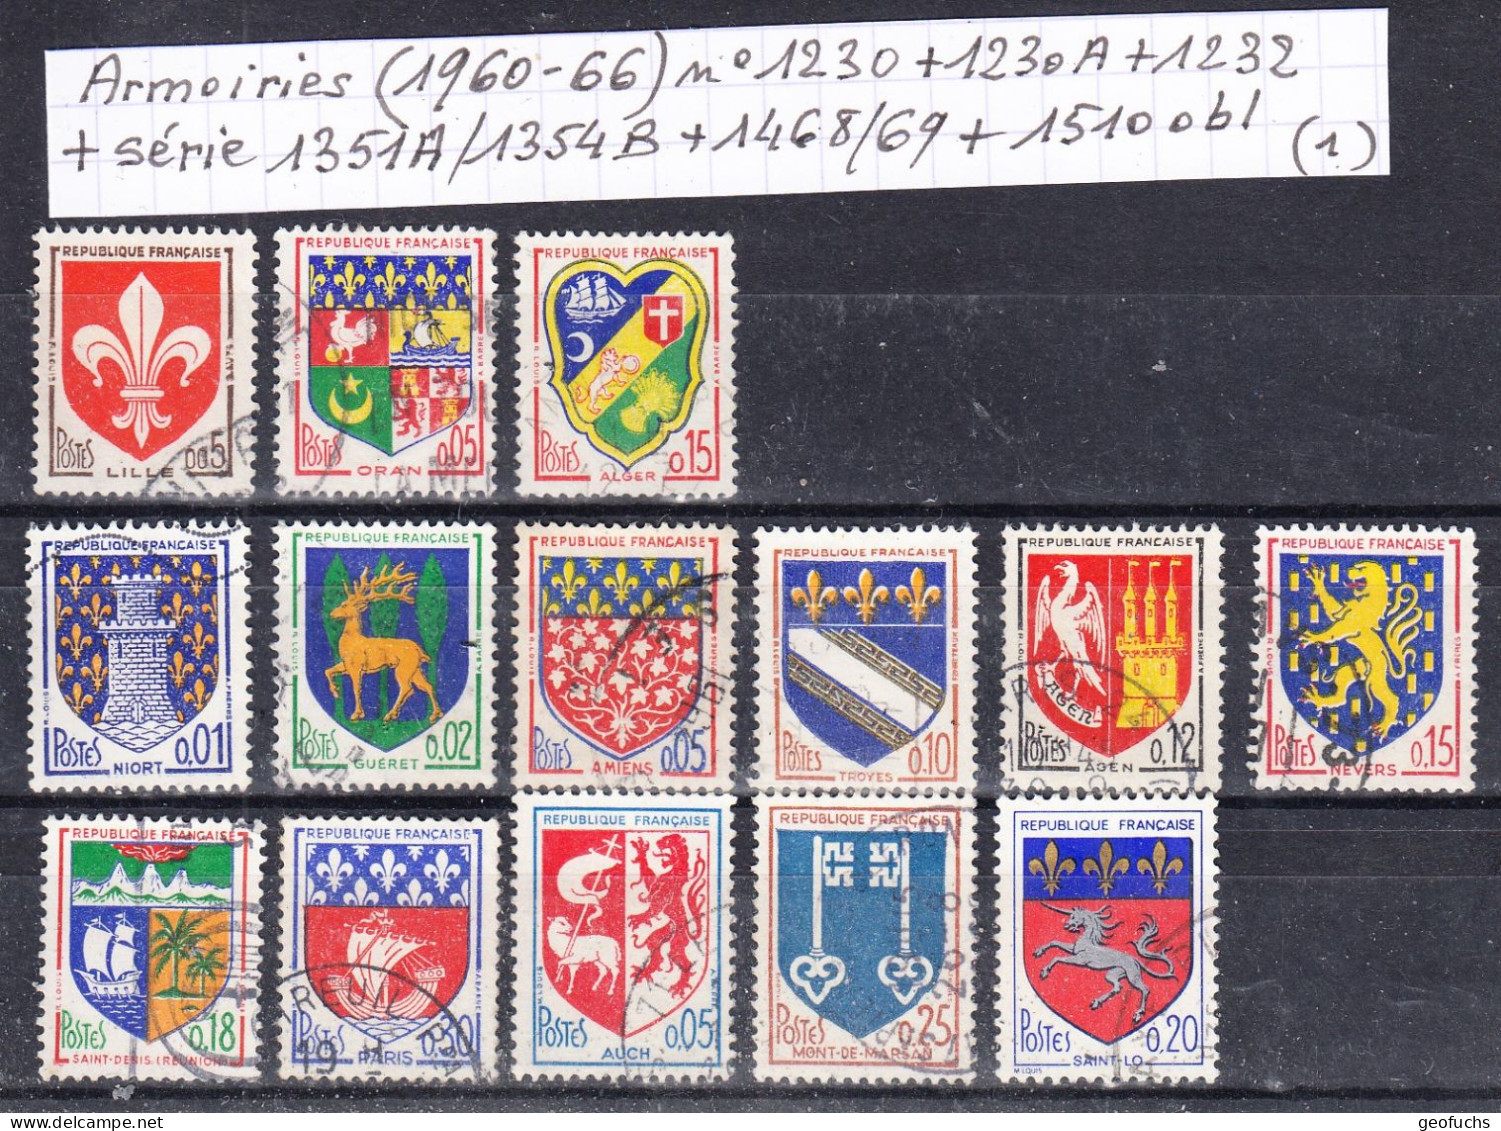 France Armoiries (1960-66) Y/T N° 1230/30A + 1232 + Série 1351A/1354B + 1468/69 + 1510 Oblitérés (lot 1) - 1941-66 Coat Of Arms And Heraldry